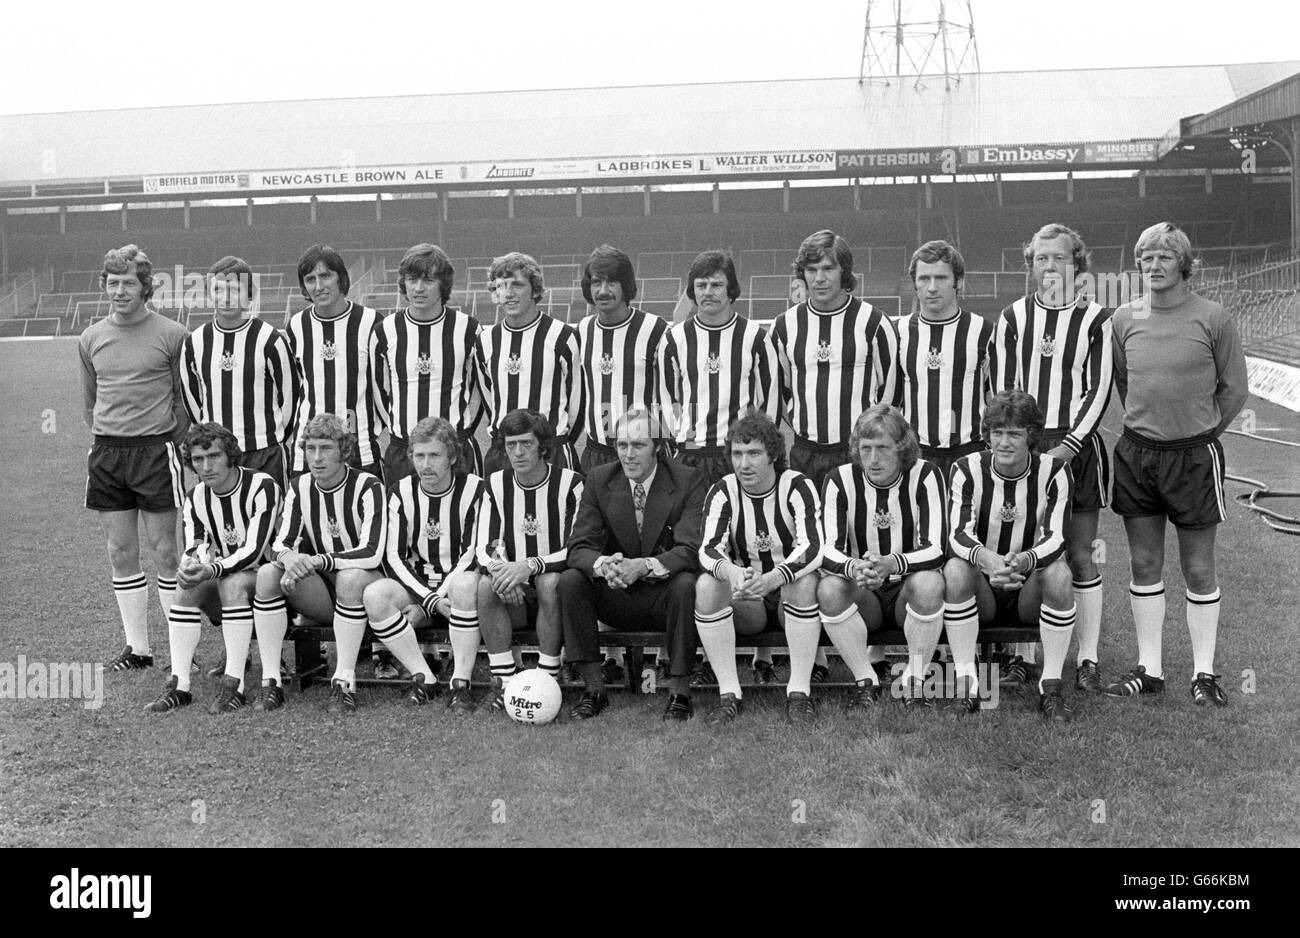 Division One Newcastle United team photo for the 1975-76 season. (top row l-r) Mike Mahoney, David Craig, Jim Smith, Irving Nattrass, Alan Kennedy, Paul Cannell, Stewart Barrowclough, Malcolm MacDonald, Tommy Craig, John Tudor and Iam McFaul. (Bottom row l-r) Micky Burns, Geoff Nulty, Alex Bruce, Terry Hibbert, Gordon Lee (manager), Tommy Cassidy, Pat Howard and Glen Keeley. Stock Photo